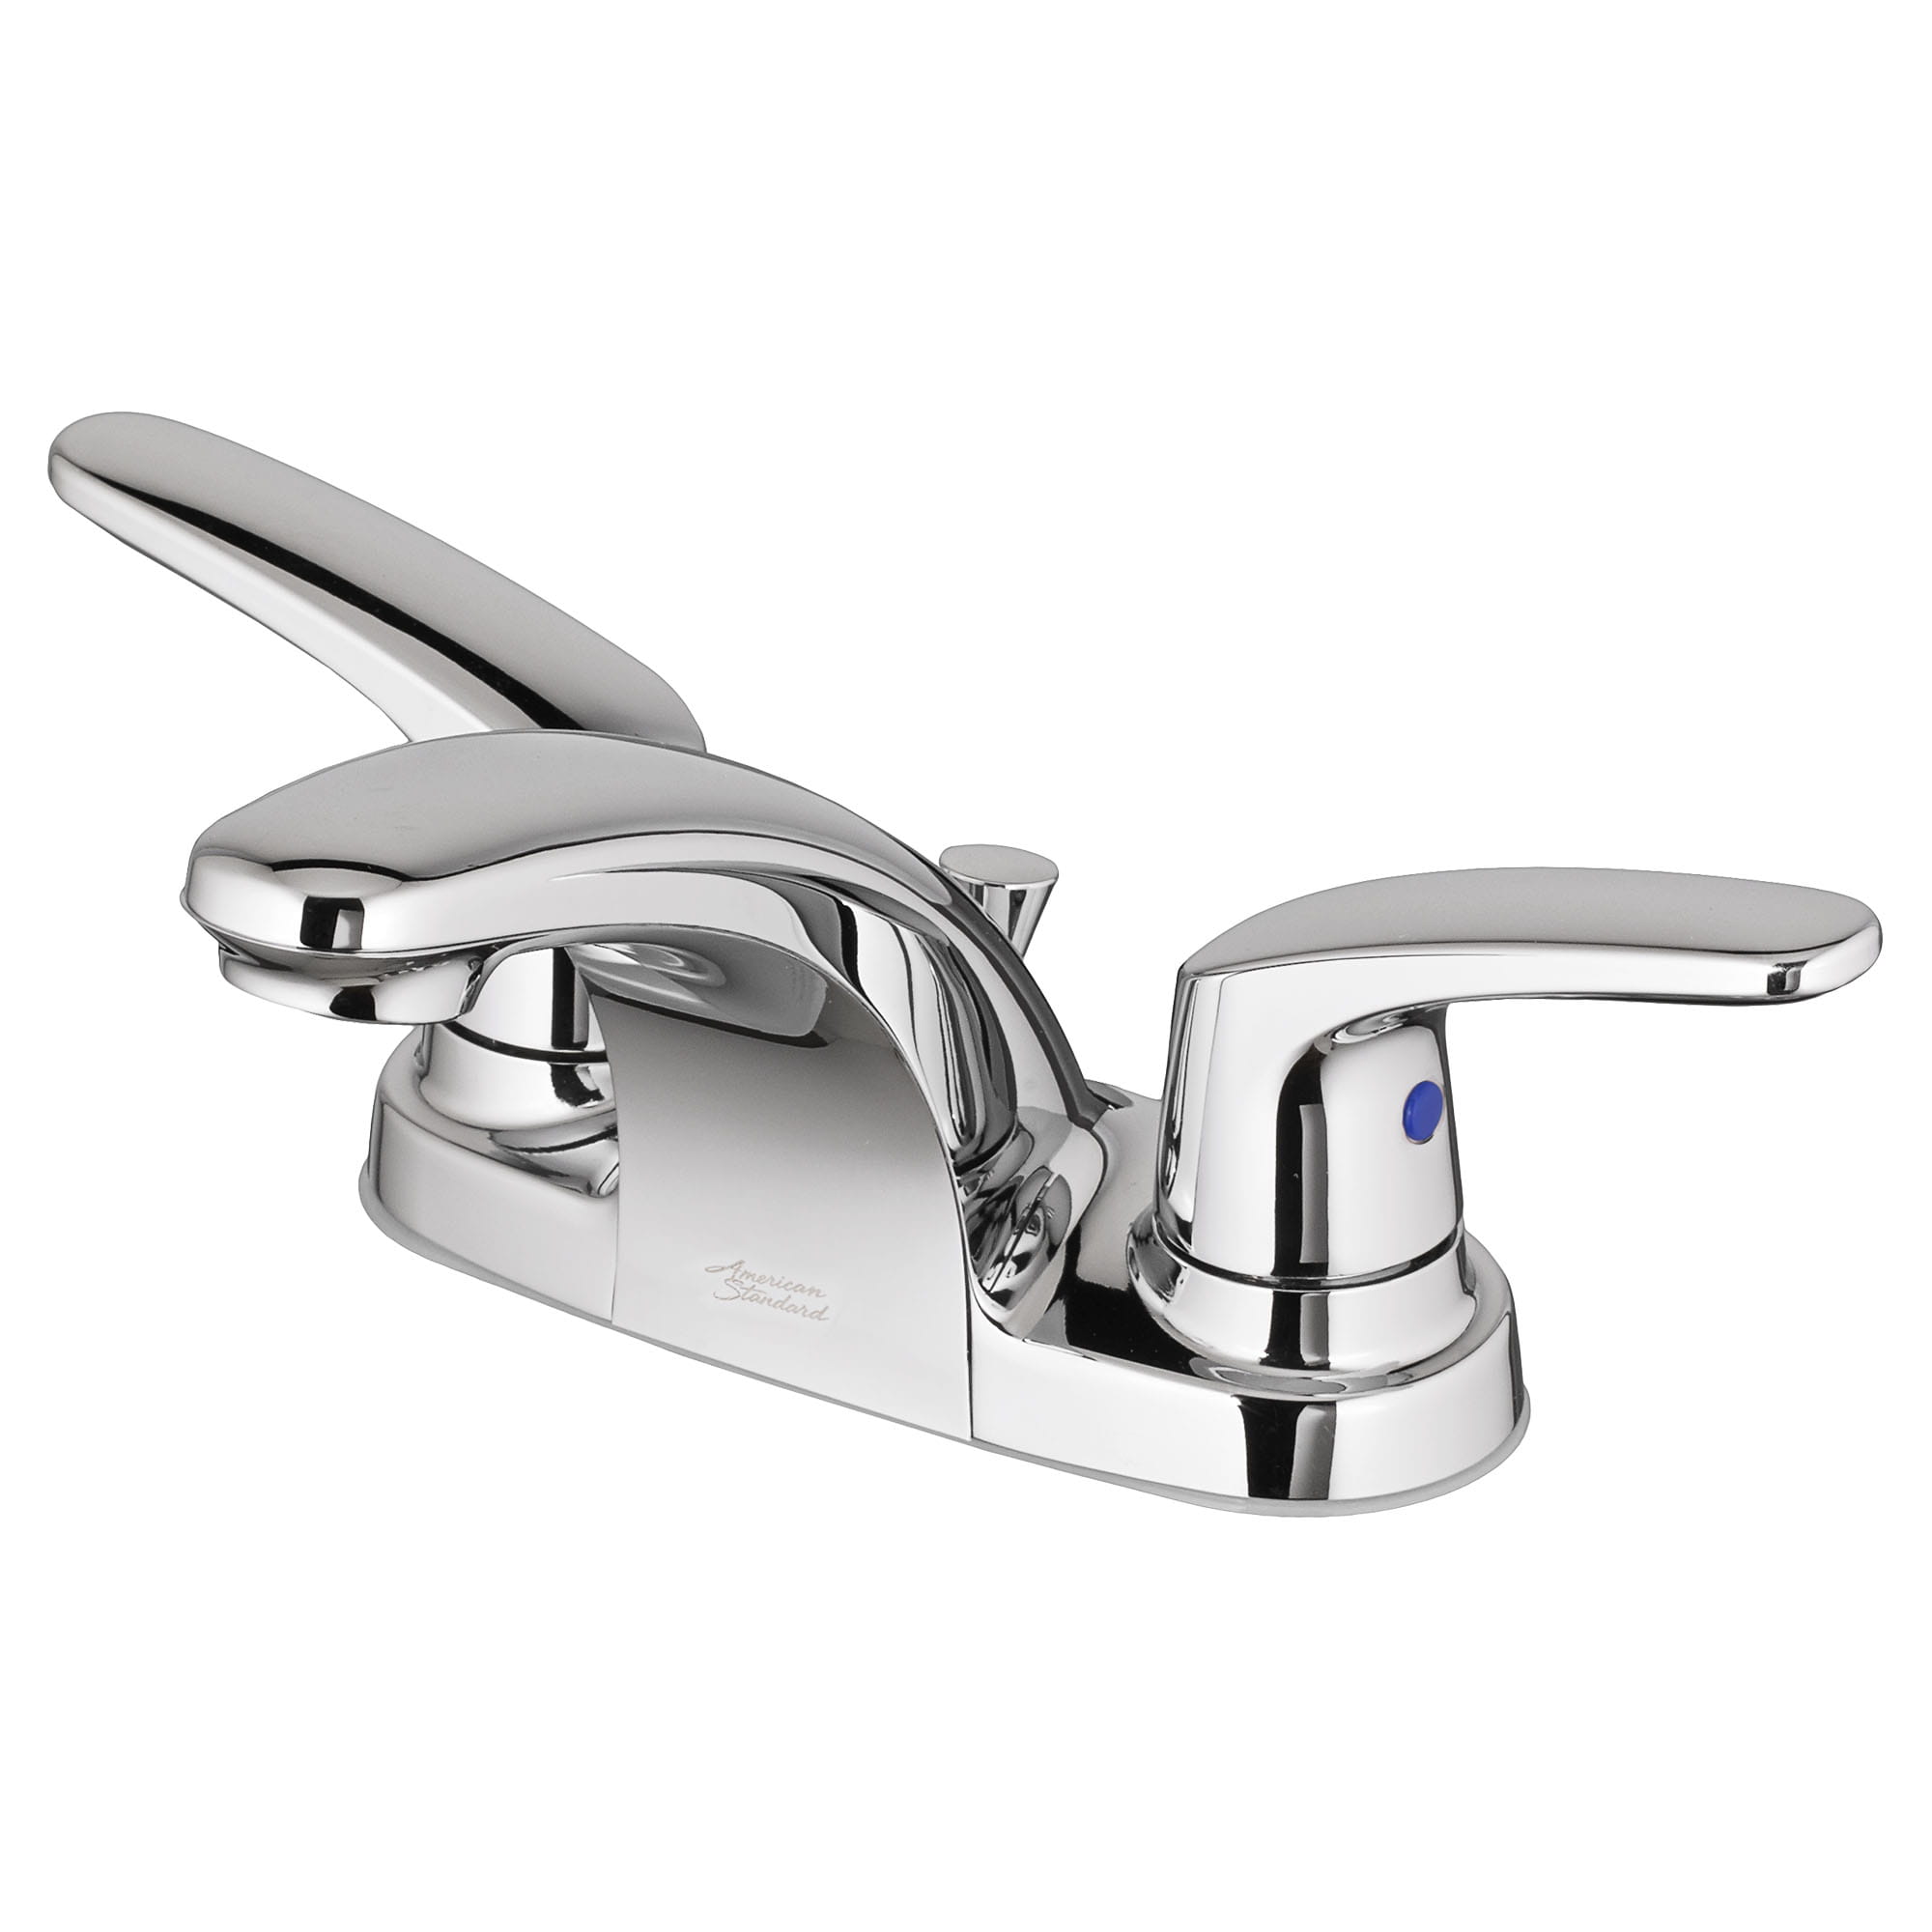 Colony PRO 4 Inch Centerset 2 Handle Bathroom Faucet 12 gpm 45 L min With Lever Handles CHROME